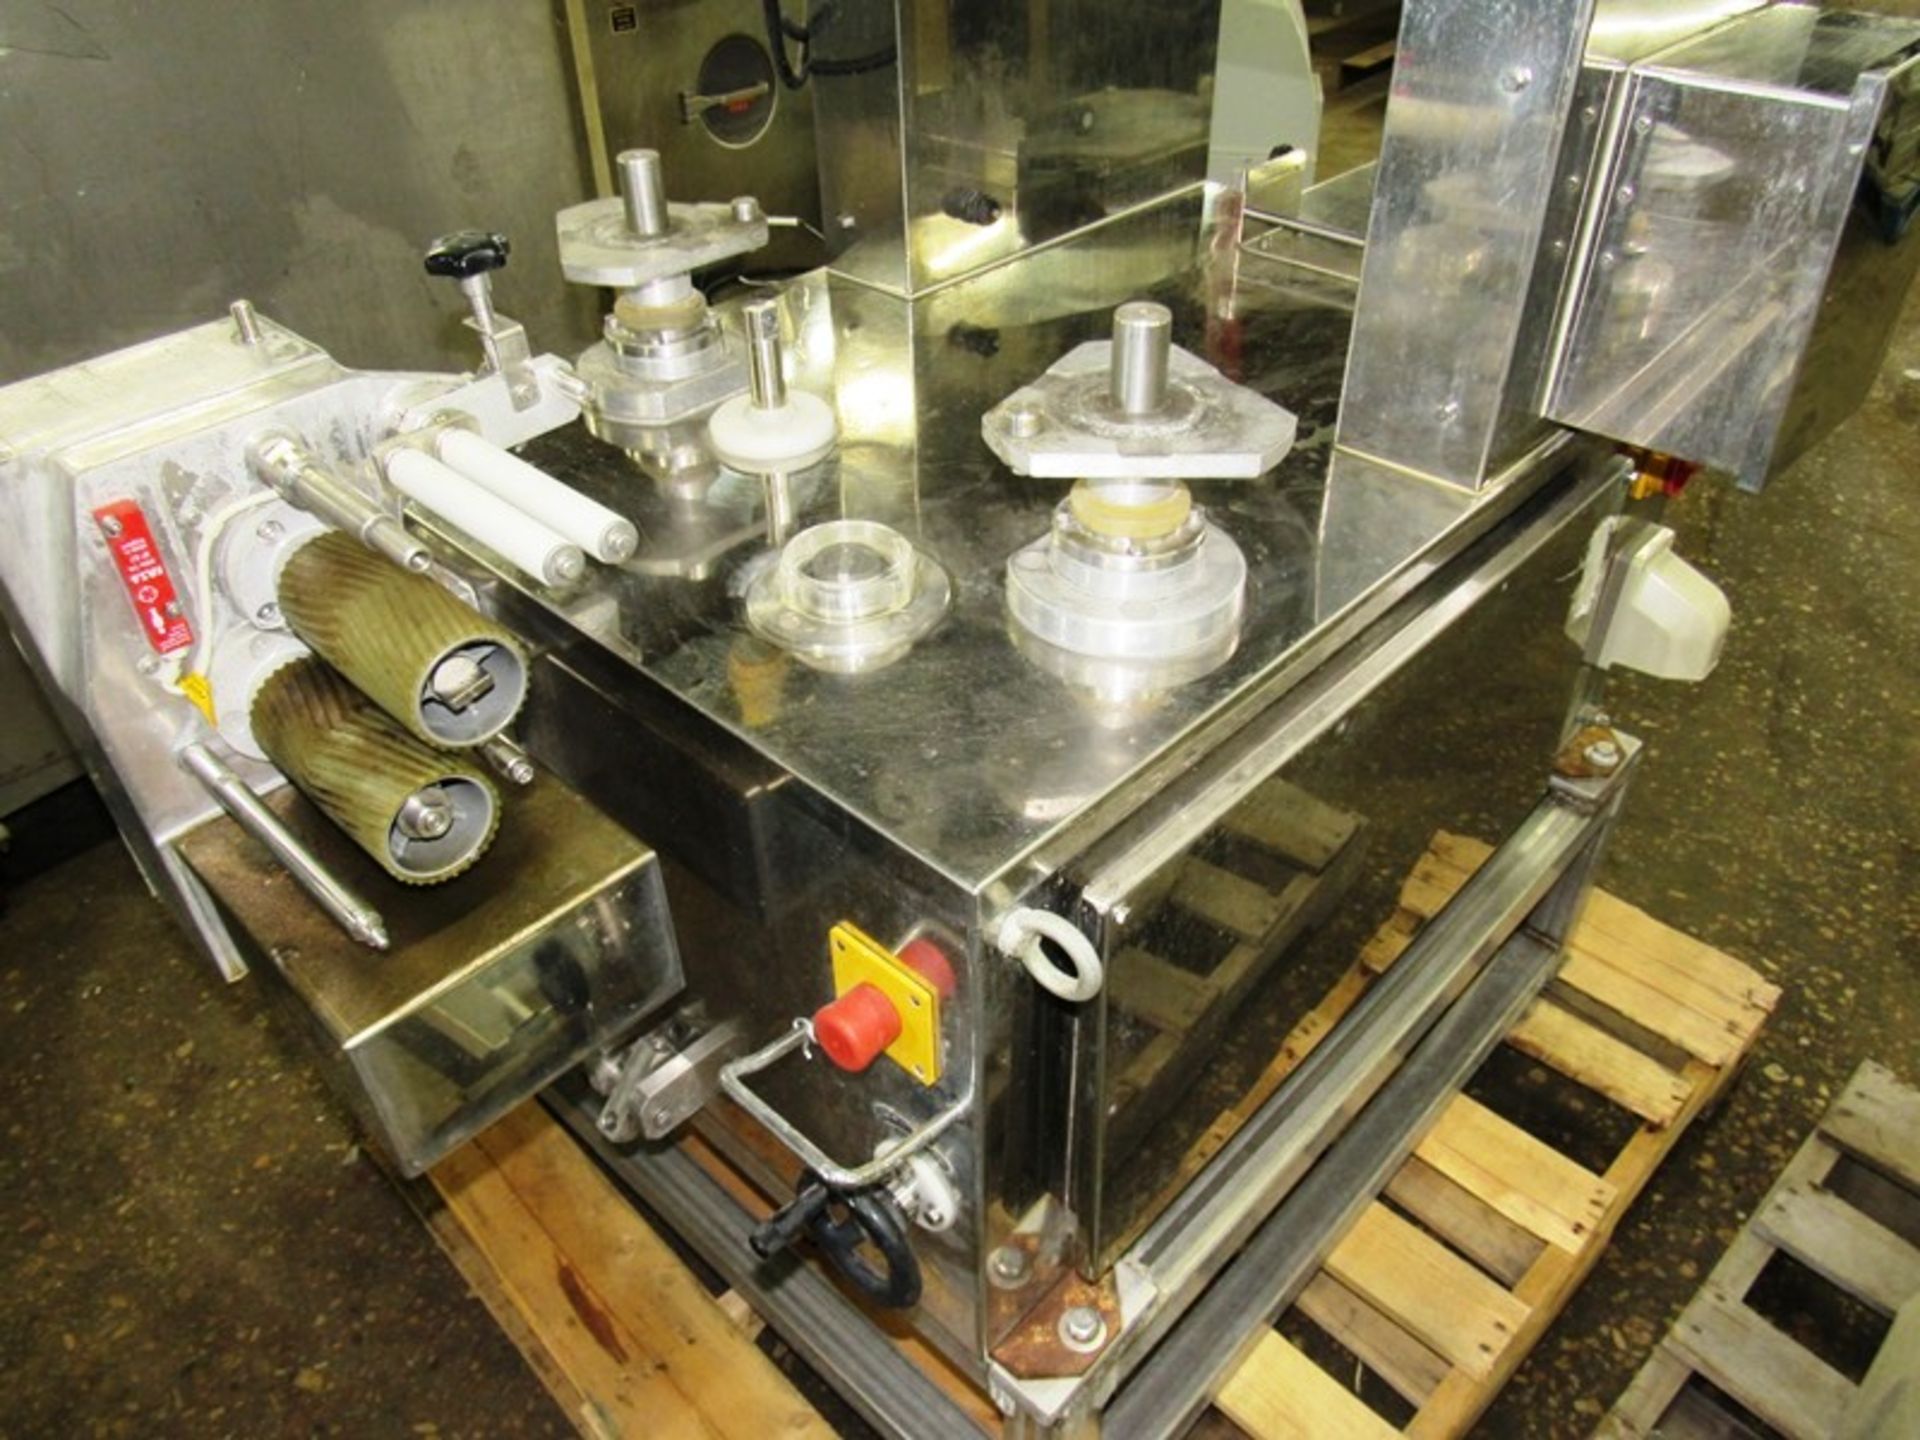 Rheon Mdl. KN300 Cornucopia Encrusting Machine, 220 volts, 3 phase - ***All Monies must be received - Image 2 of 7